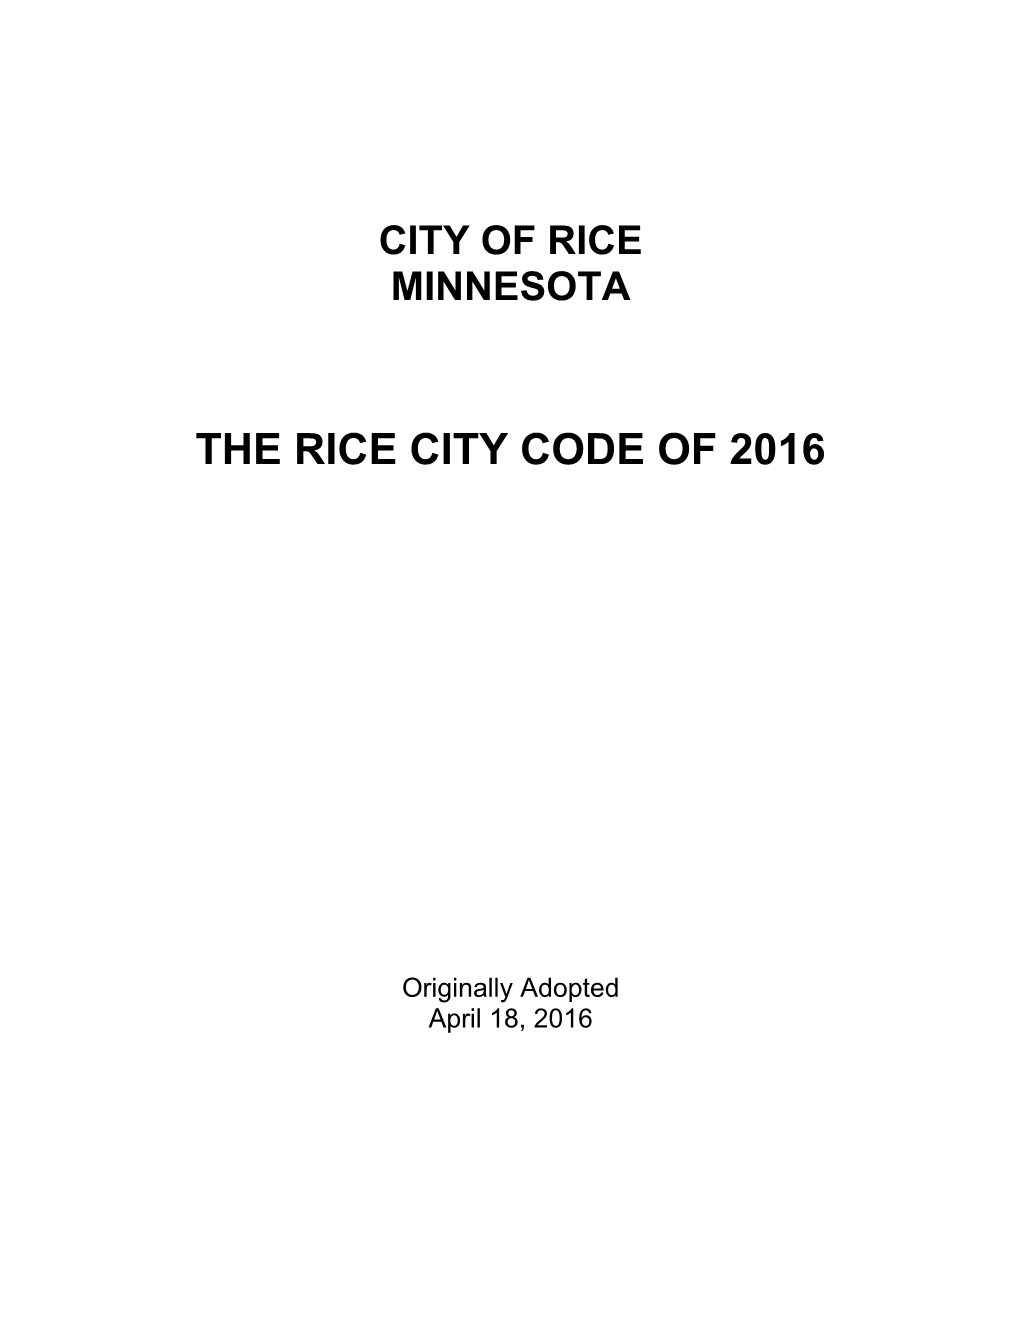 The Rice City Code of 2016